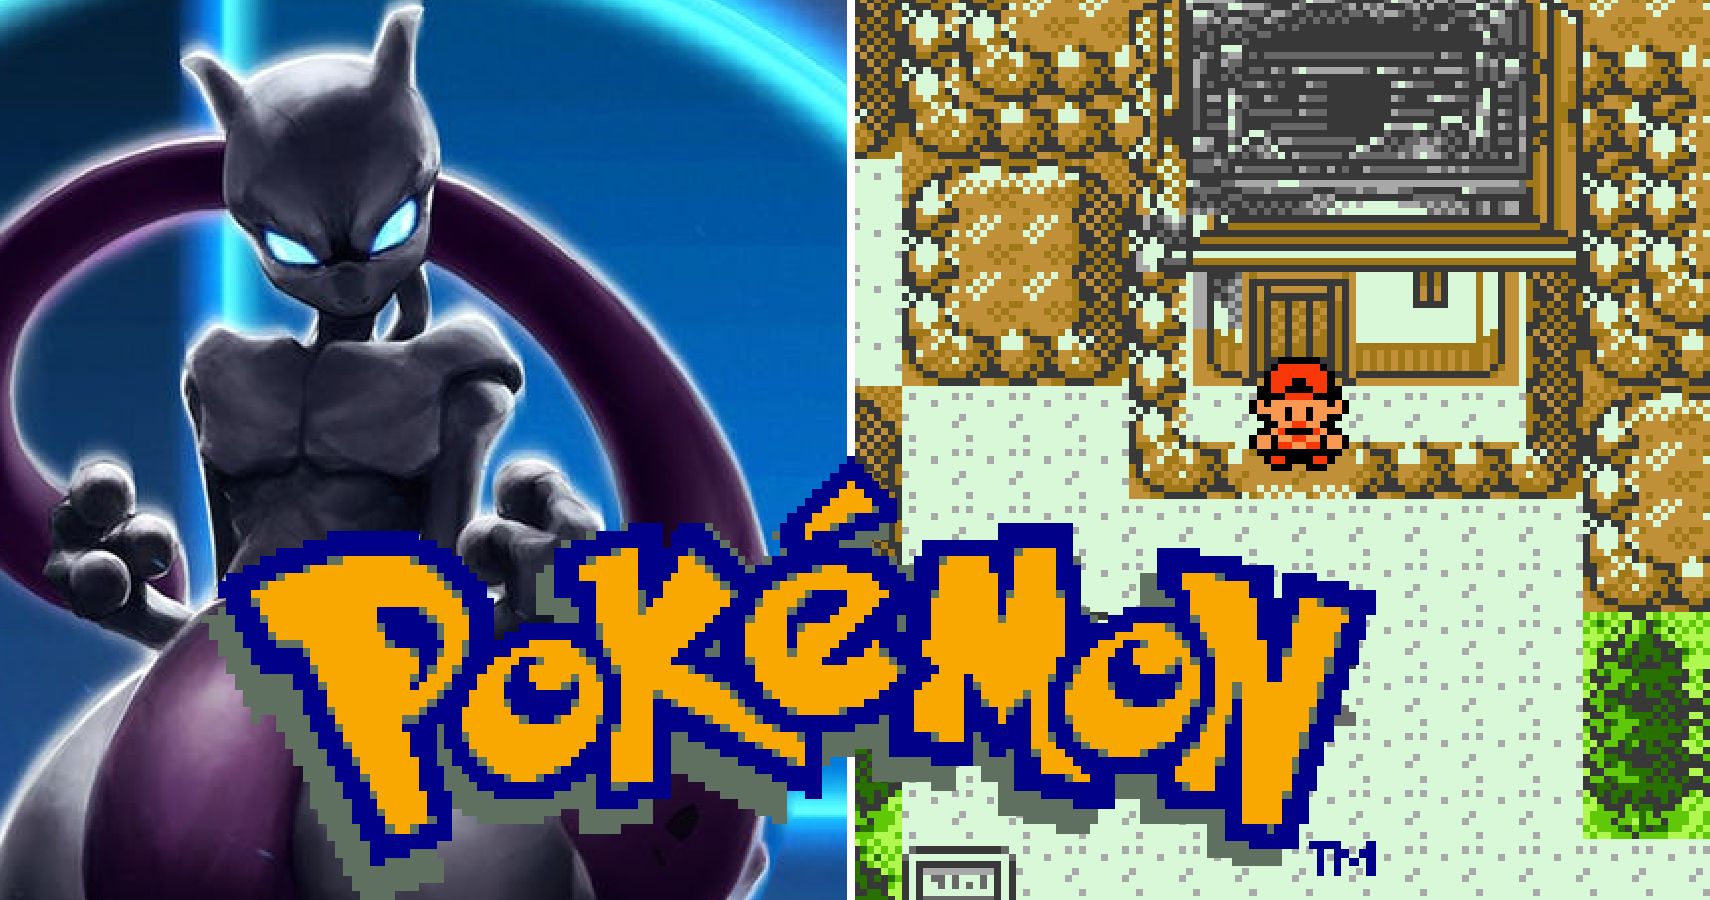 Pokémon Gold in first-person 3D - CNET